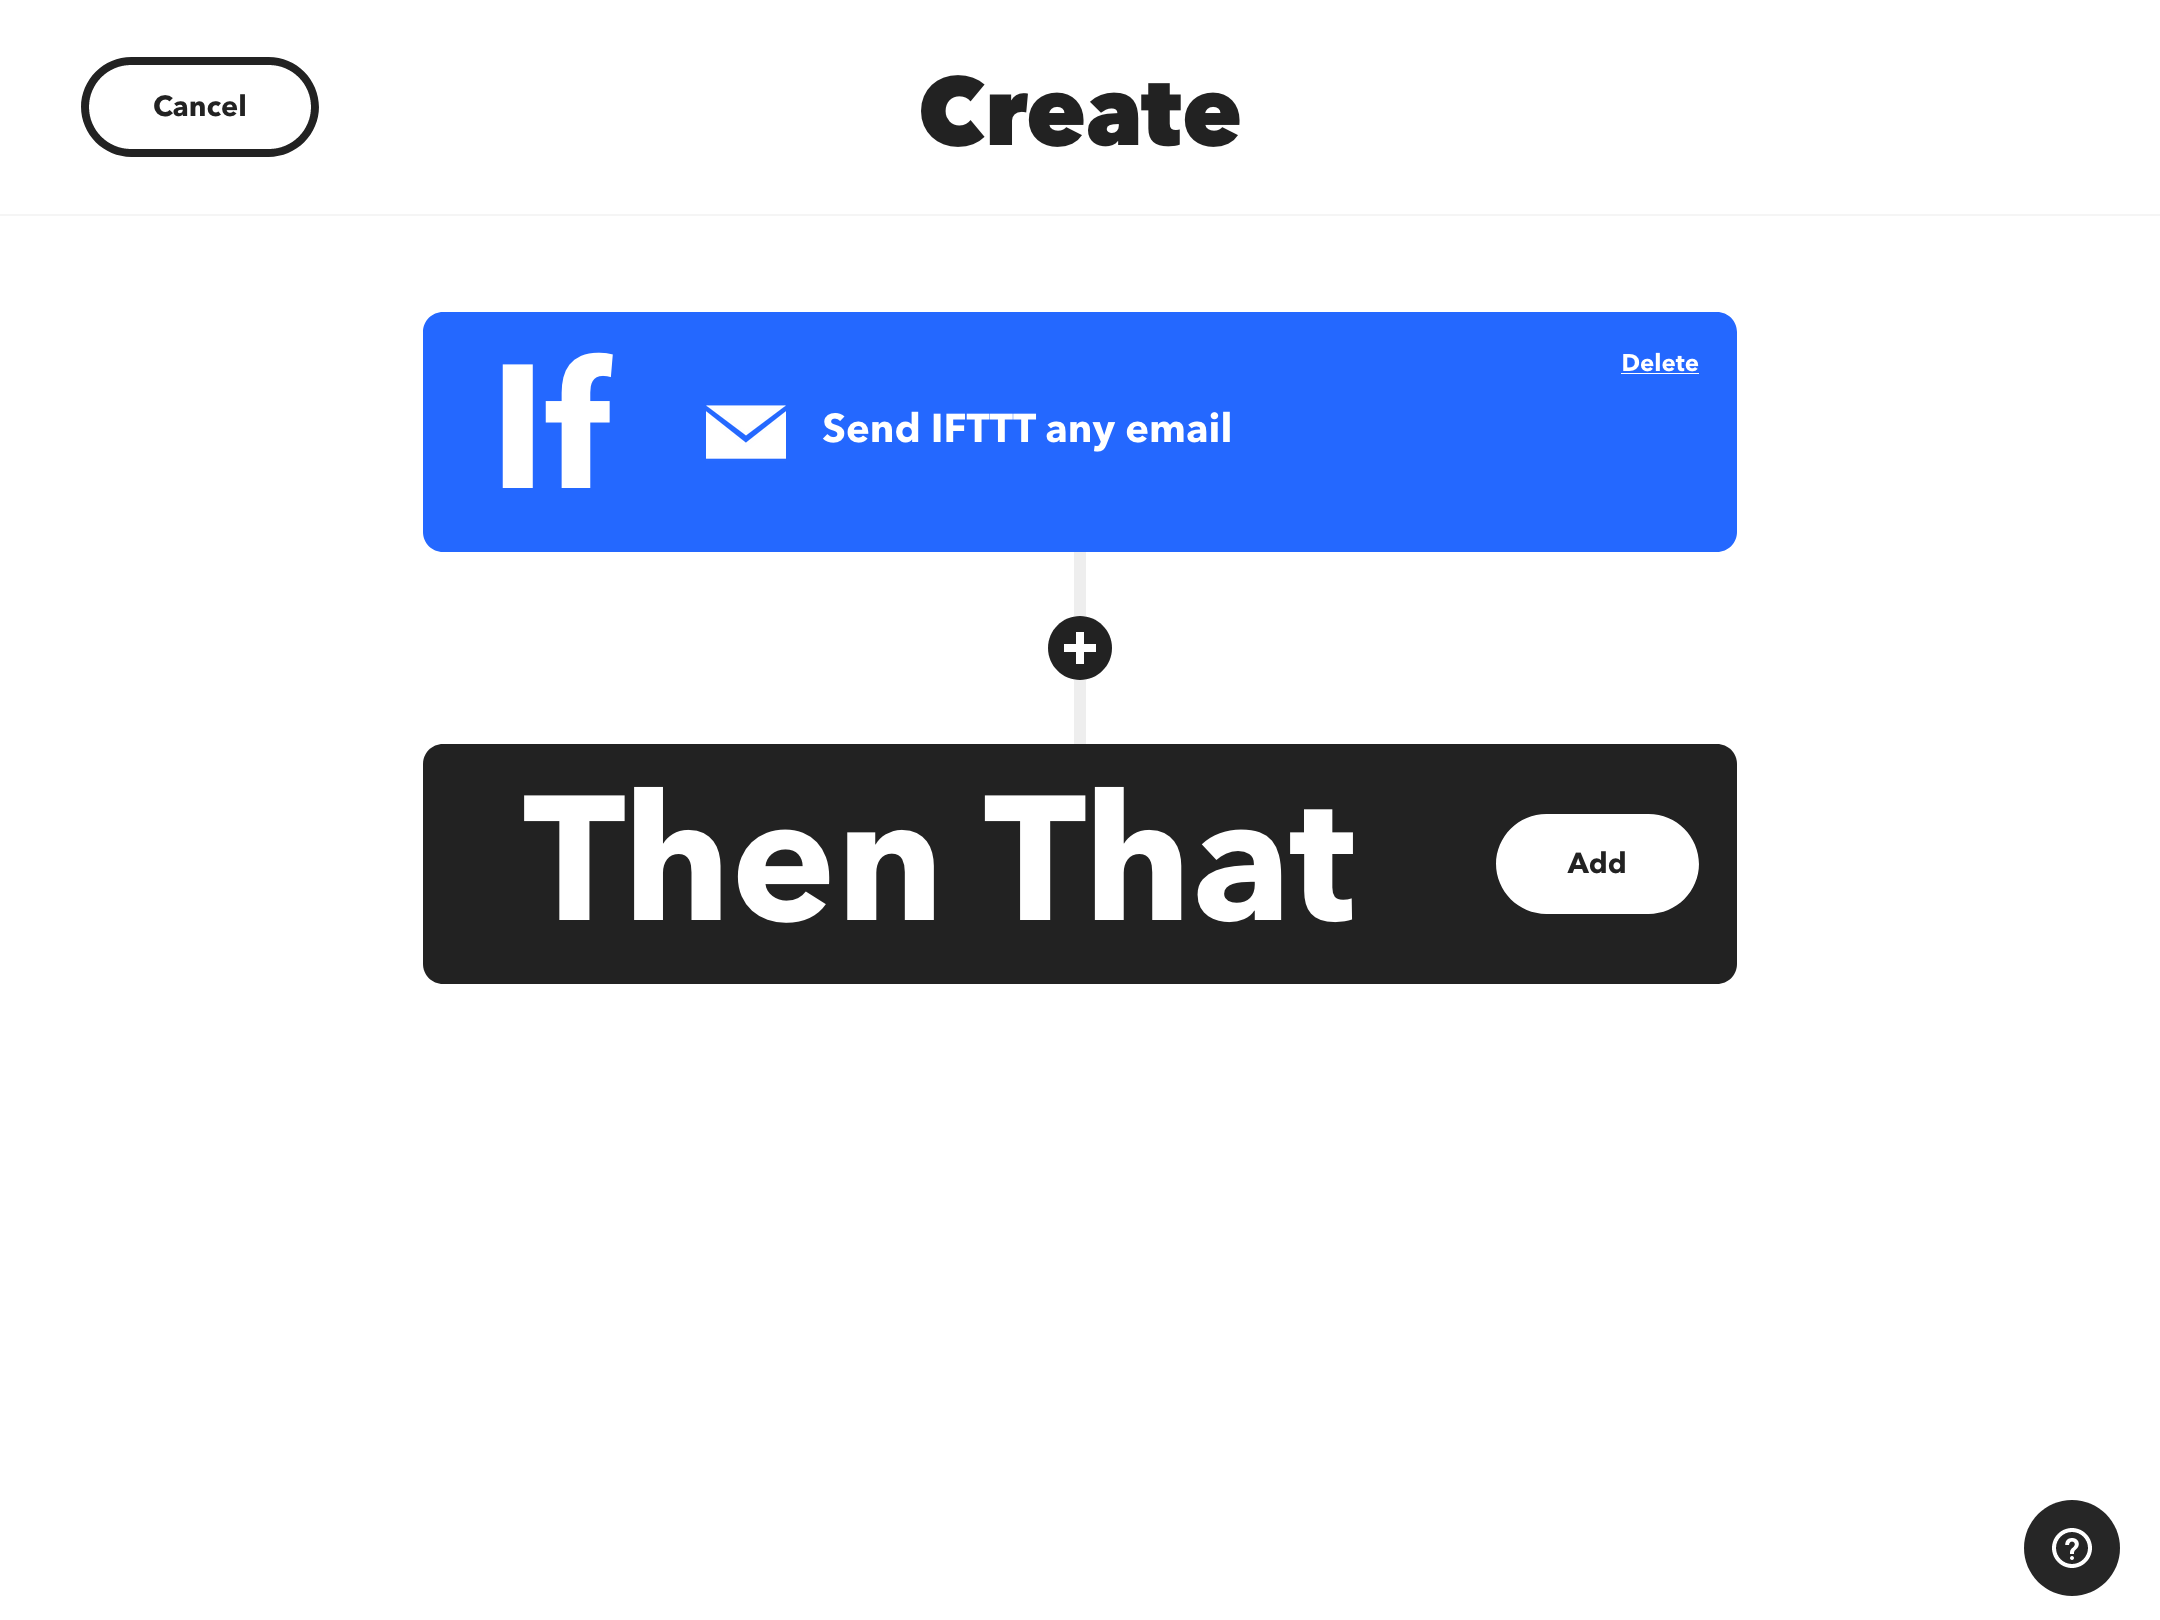 IFTTT: Choose the Then That action